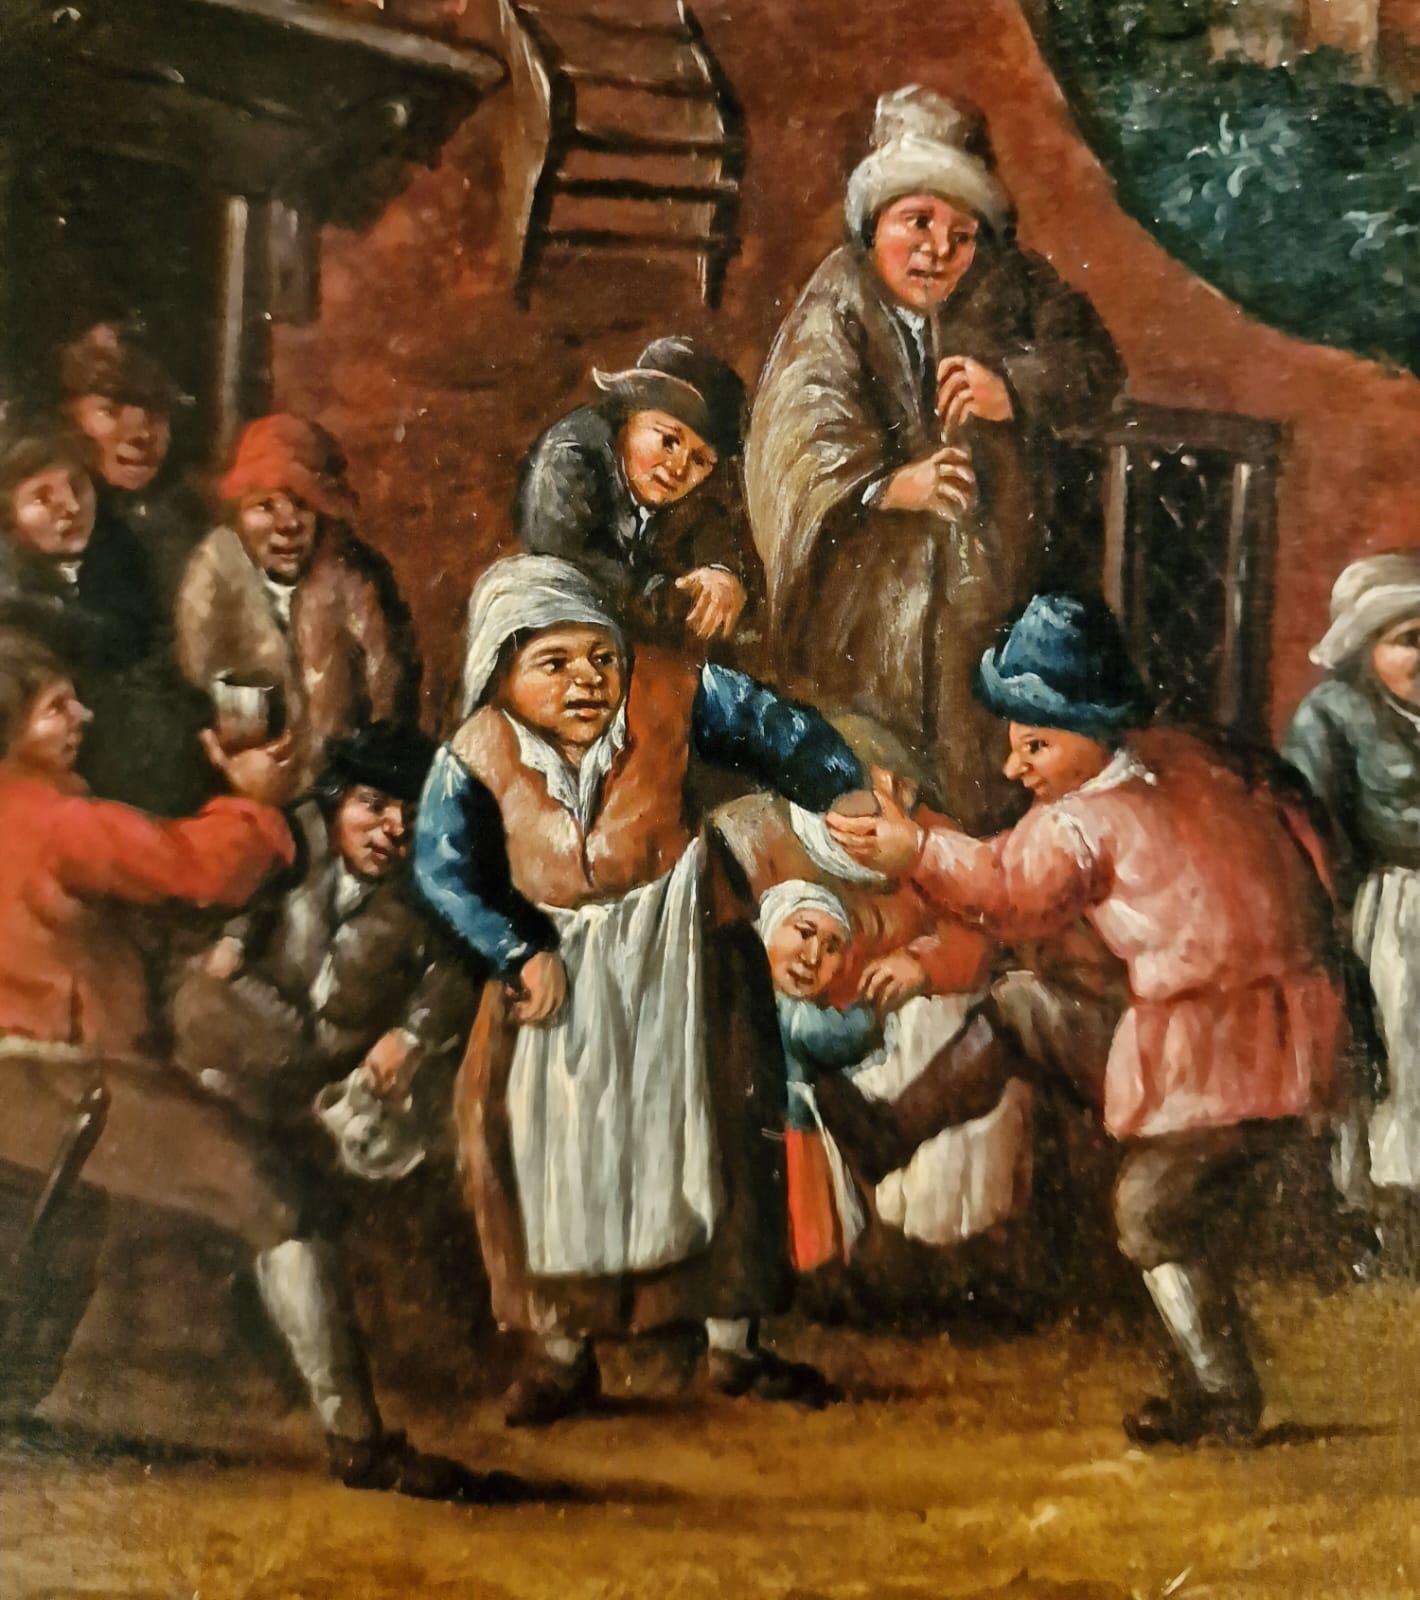 Charming tavern scene depicting drunken peasants enjoying dancing and drinking in front a farmhouse/ tavern in a landscape. Painted in great detail in vivid colors on a hand cut oak panel. 

Circa 1700, follower of David Teniers the Younger, Antwerp